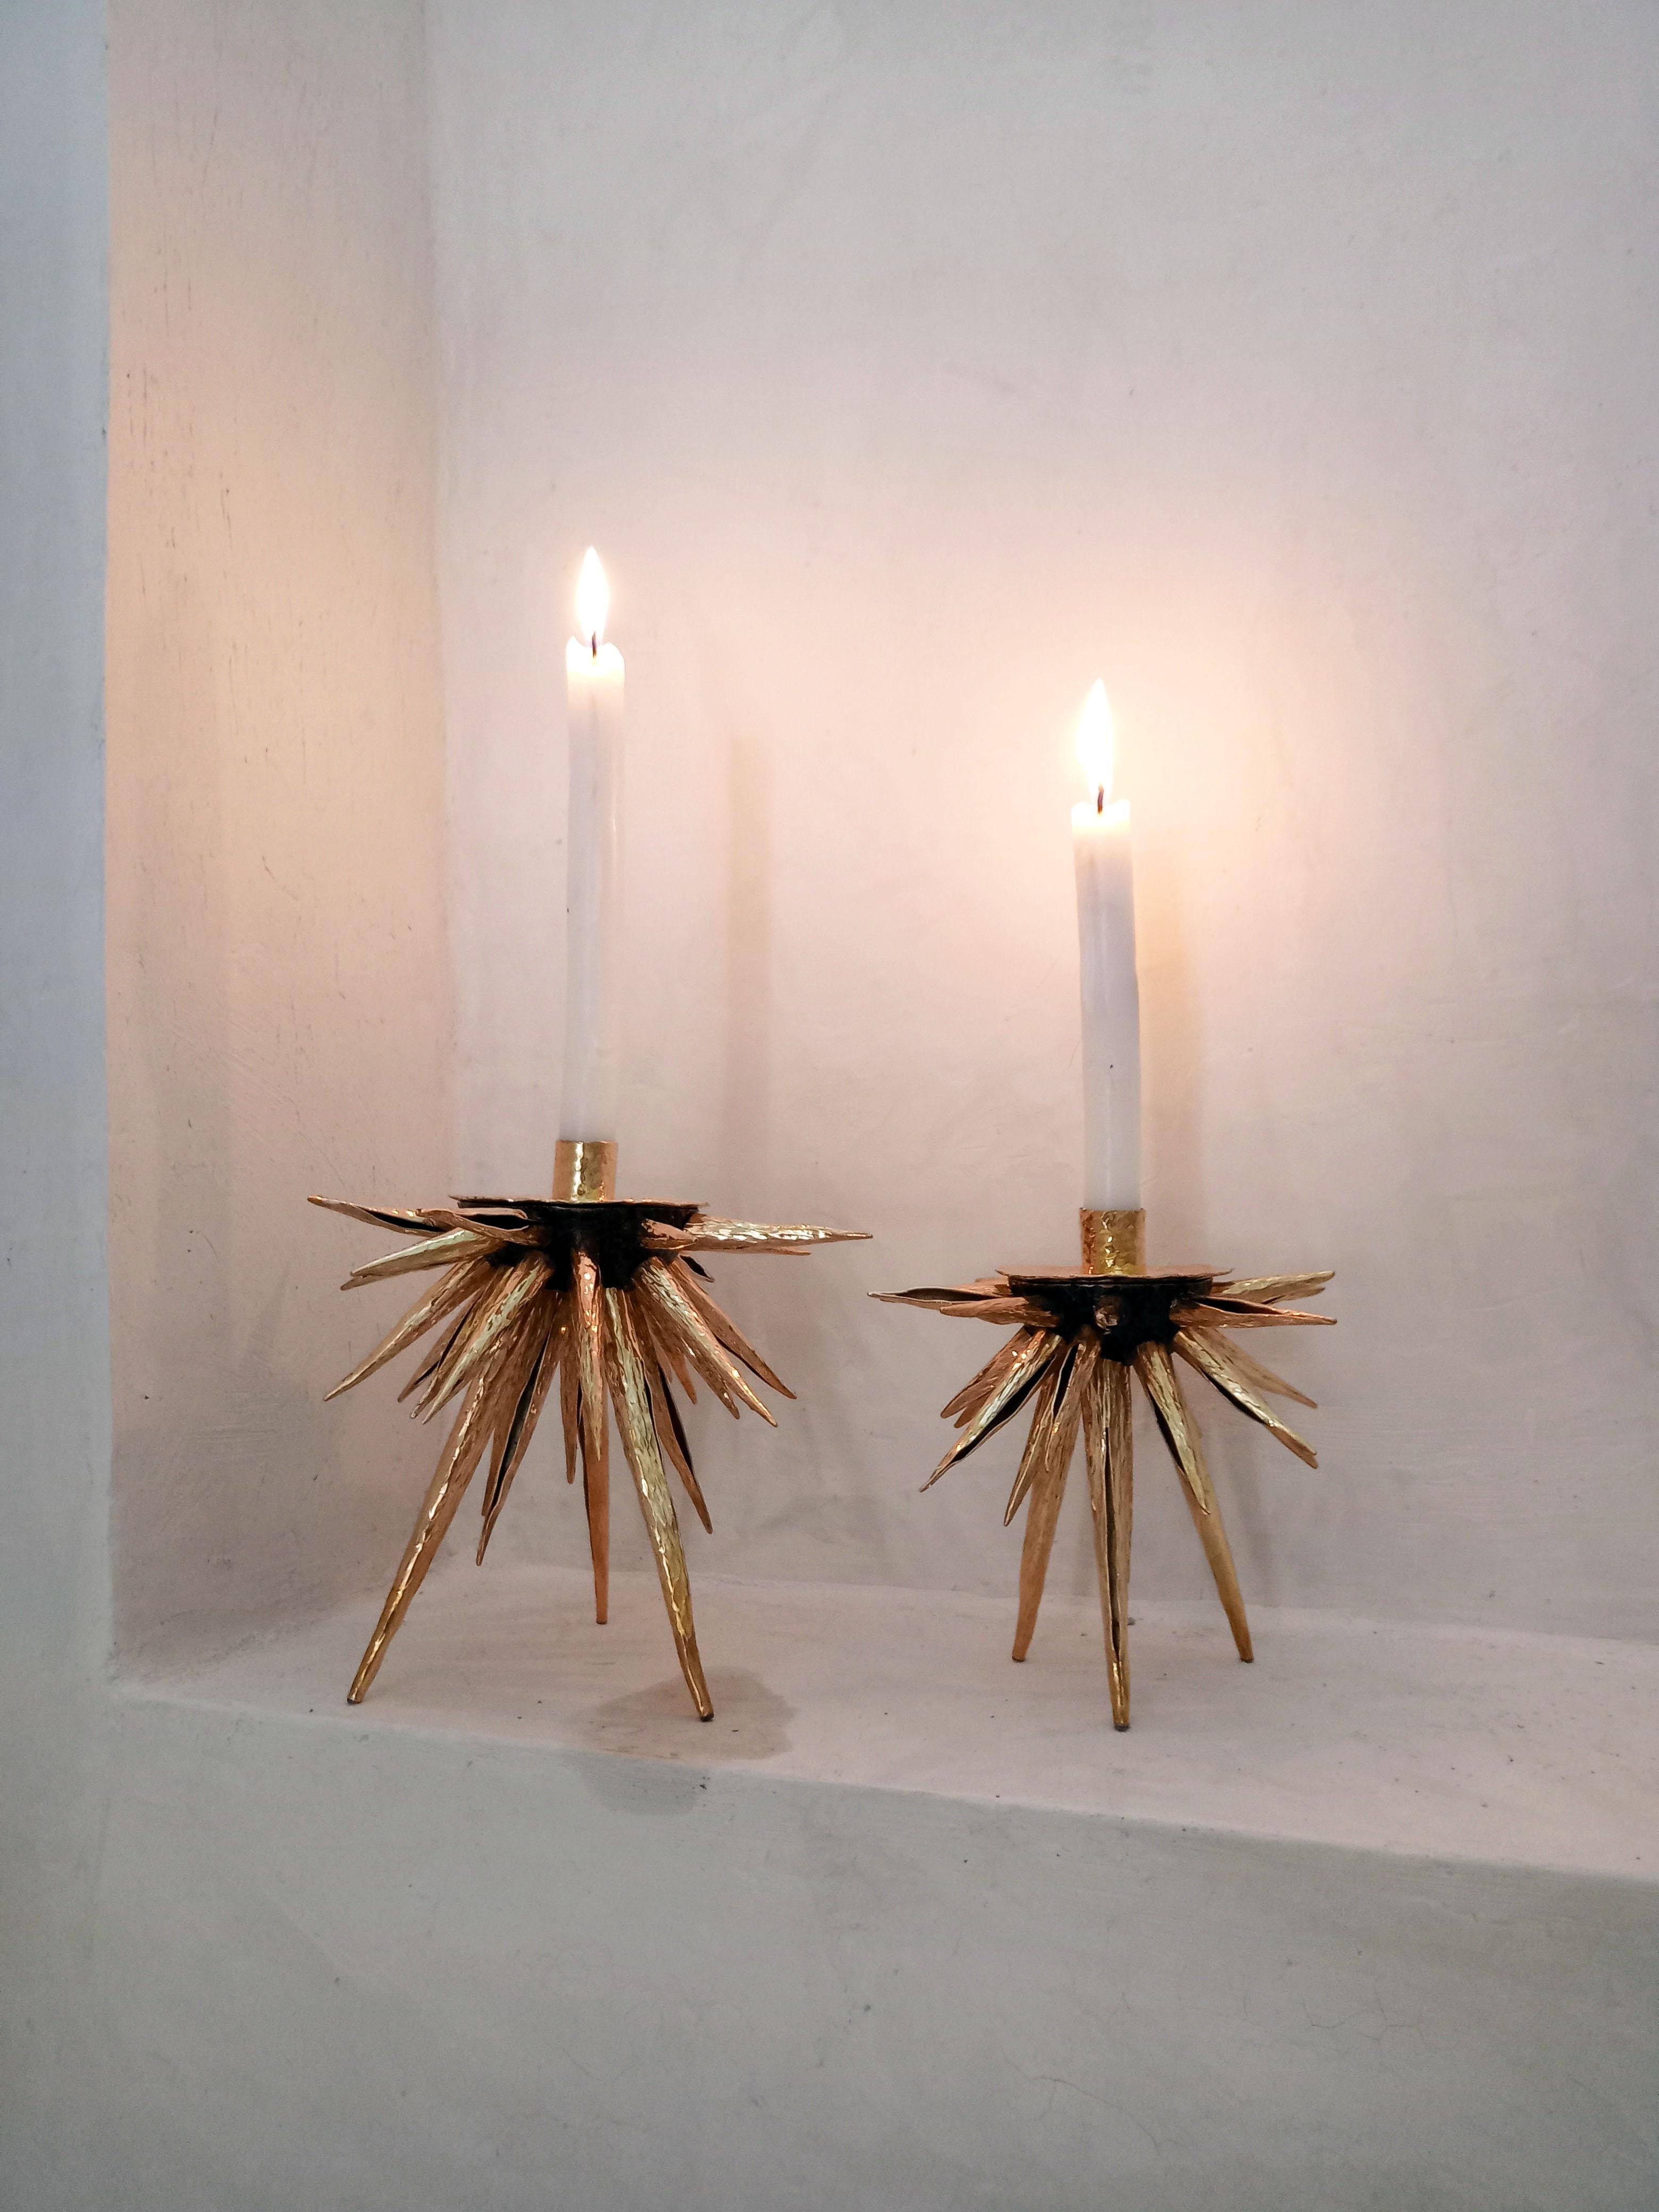 Designed by Cristina Romo, inspired by the wonderfull shapes of marine life, this sea urchin candle holder is made out of Tumbaga, an alloy of copper and zinc, each spike is hand hammered, cut and riveted in the ROMOHERRERA workshops in Taxco,